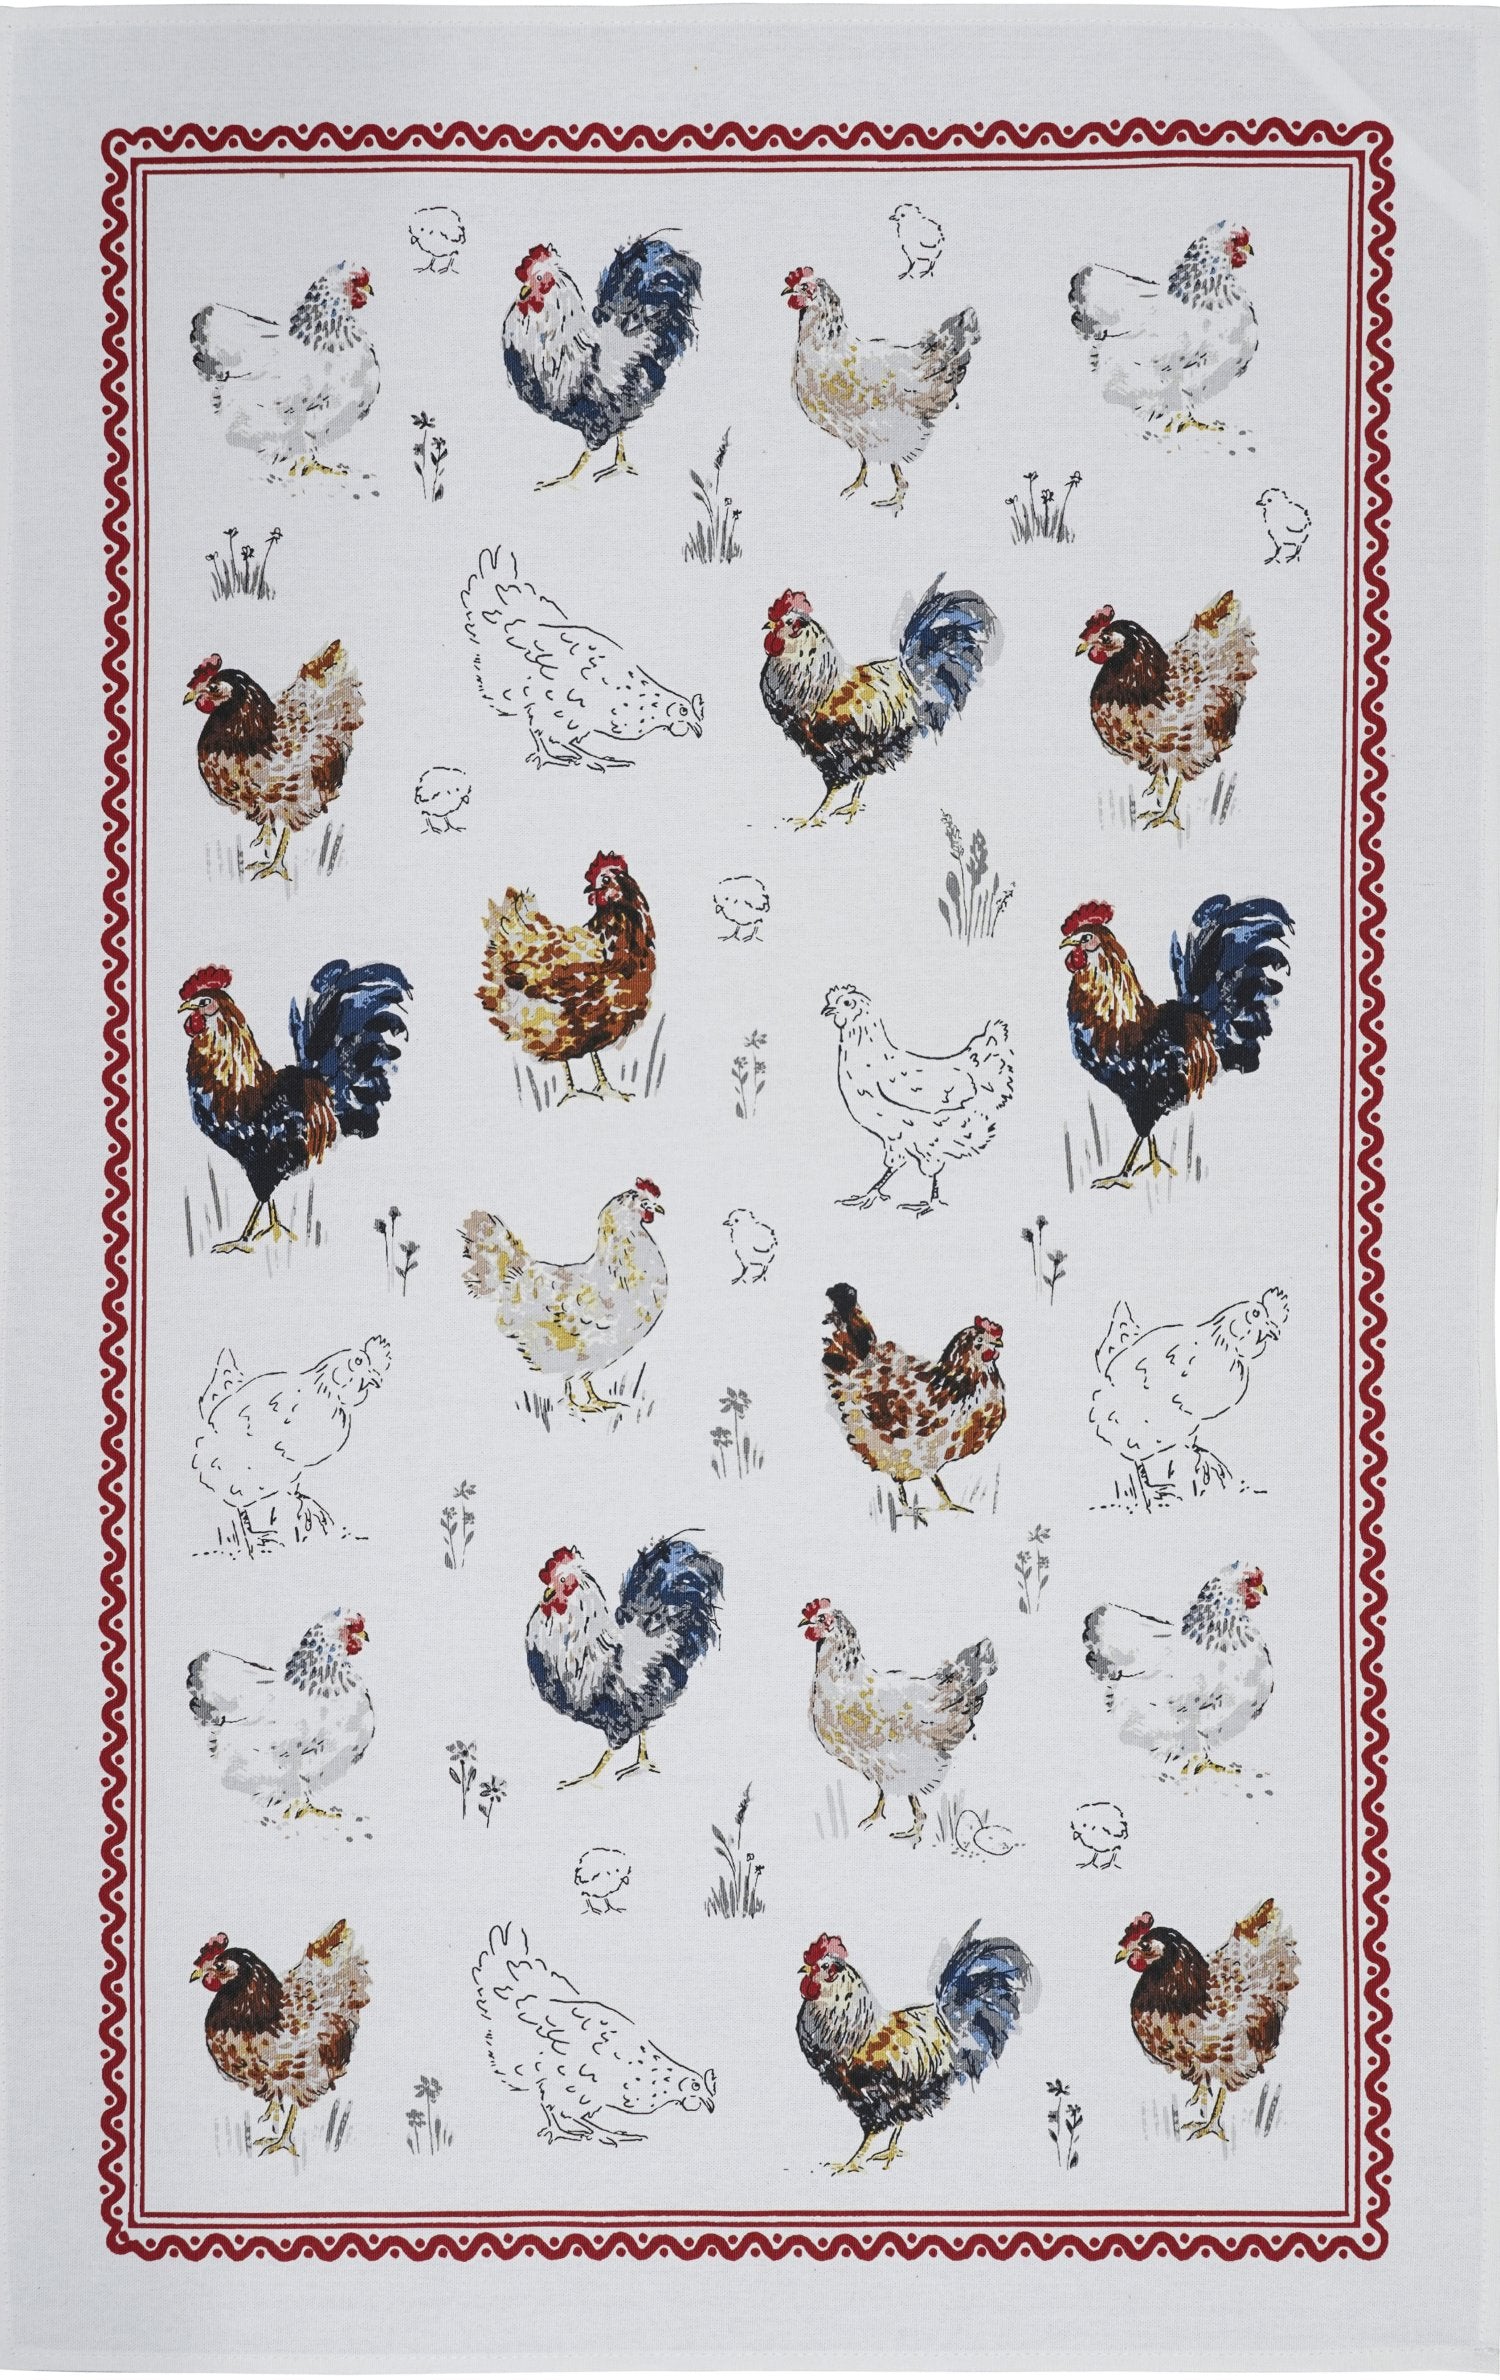 Ulster Weavers, "Farm Birds", Printed recycled cotton tea towel.